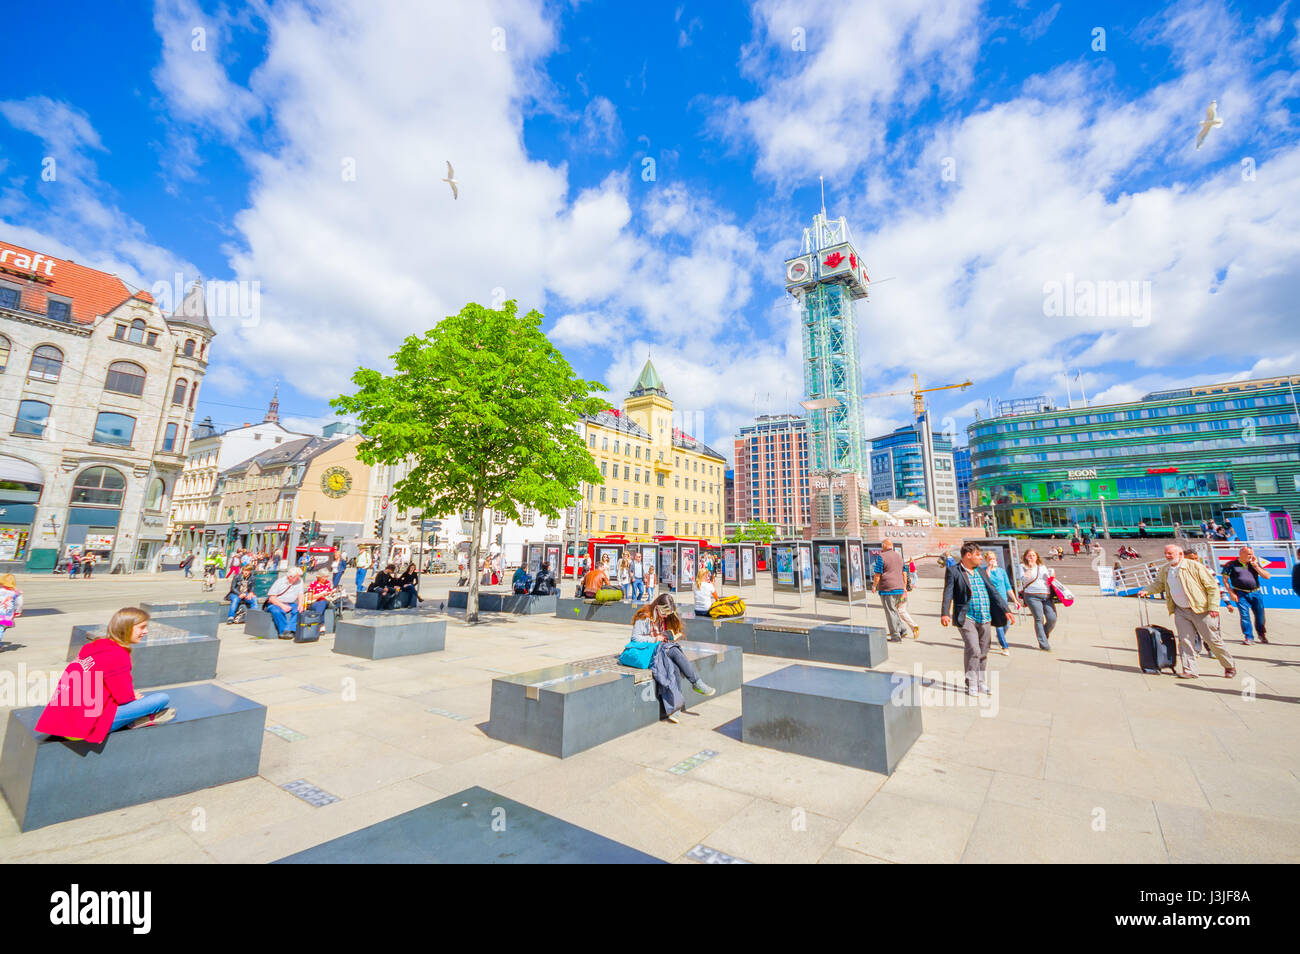 OSLO, NORWAY - 8 JULY, 2015: Plaza in front of Oslo Central station with  people around on nice sunny day Stock Photo - Alamy